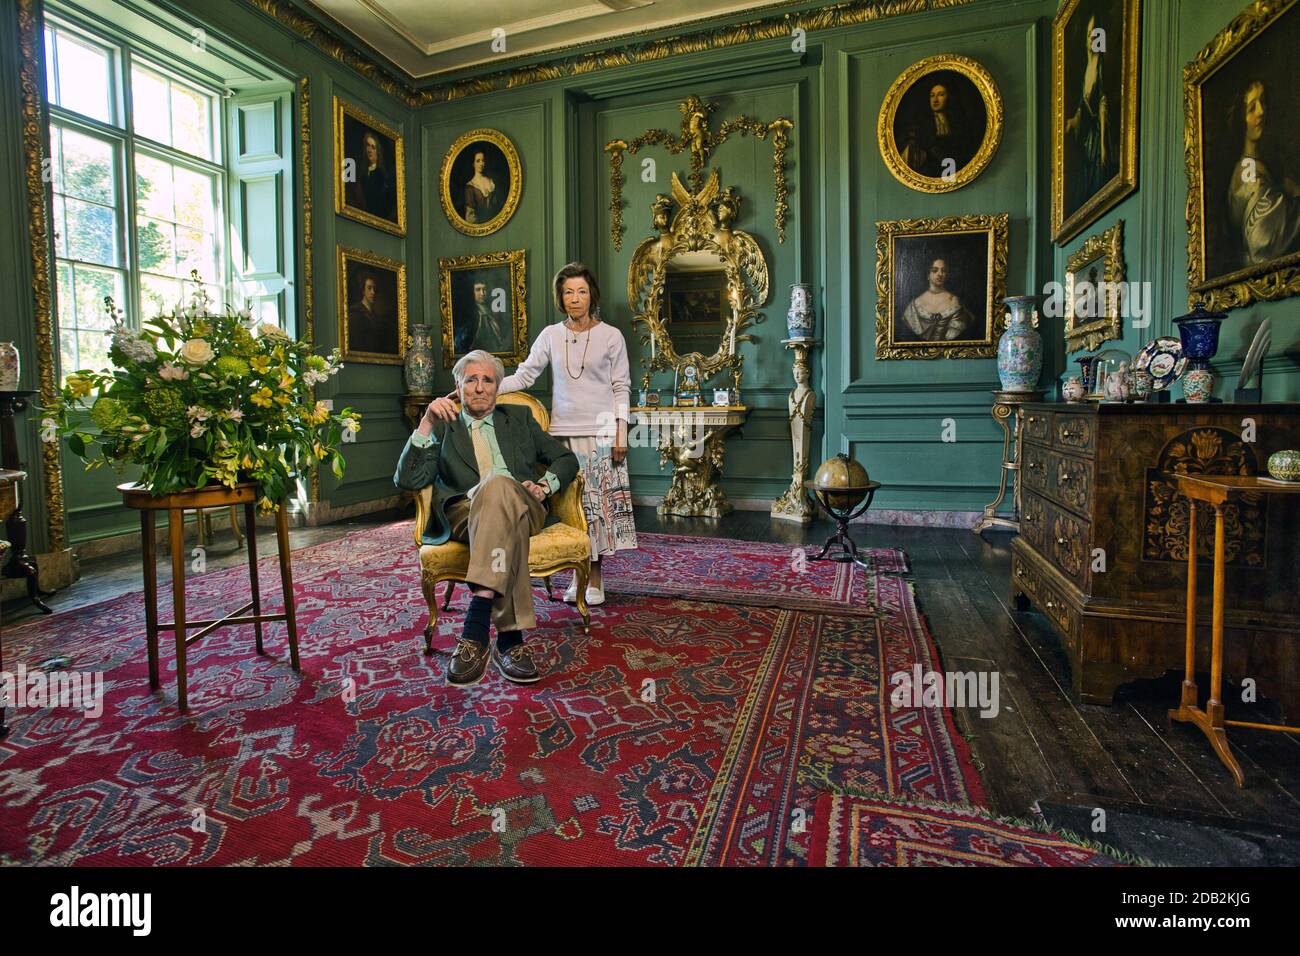 GREAT BRITAIN / England /Cornwall / Padstow / Prideaux Place ; Peter Prideaux Brune with his wife Elisabeth. Stock Photo